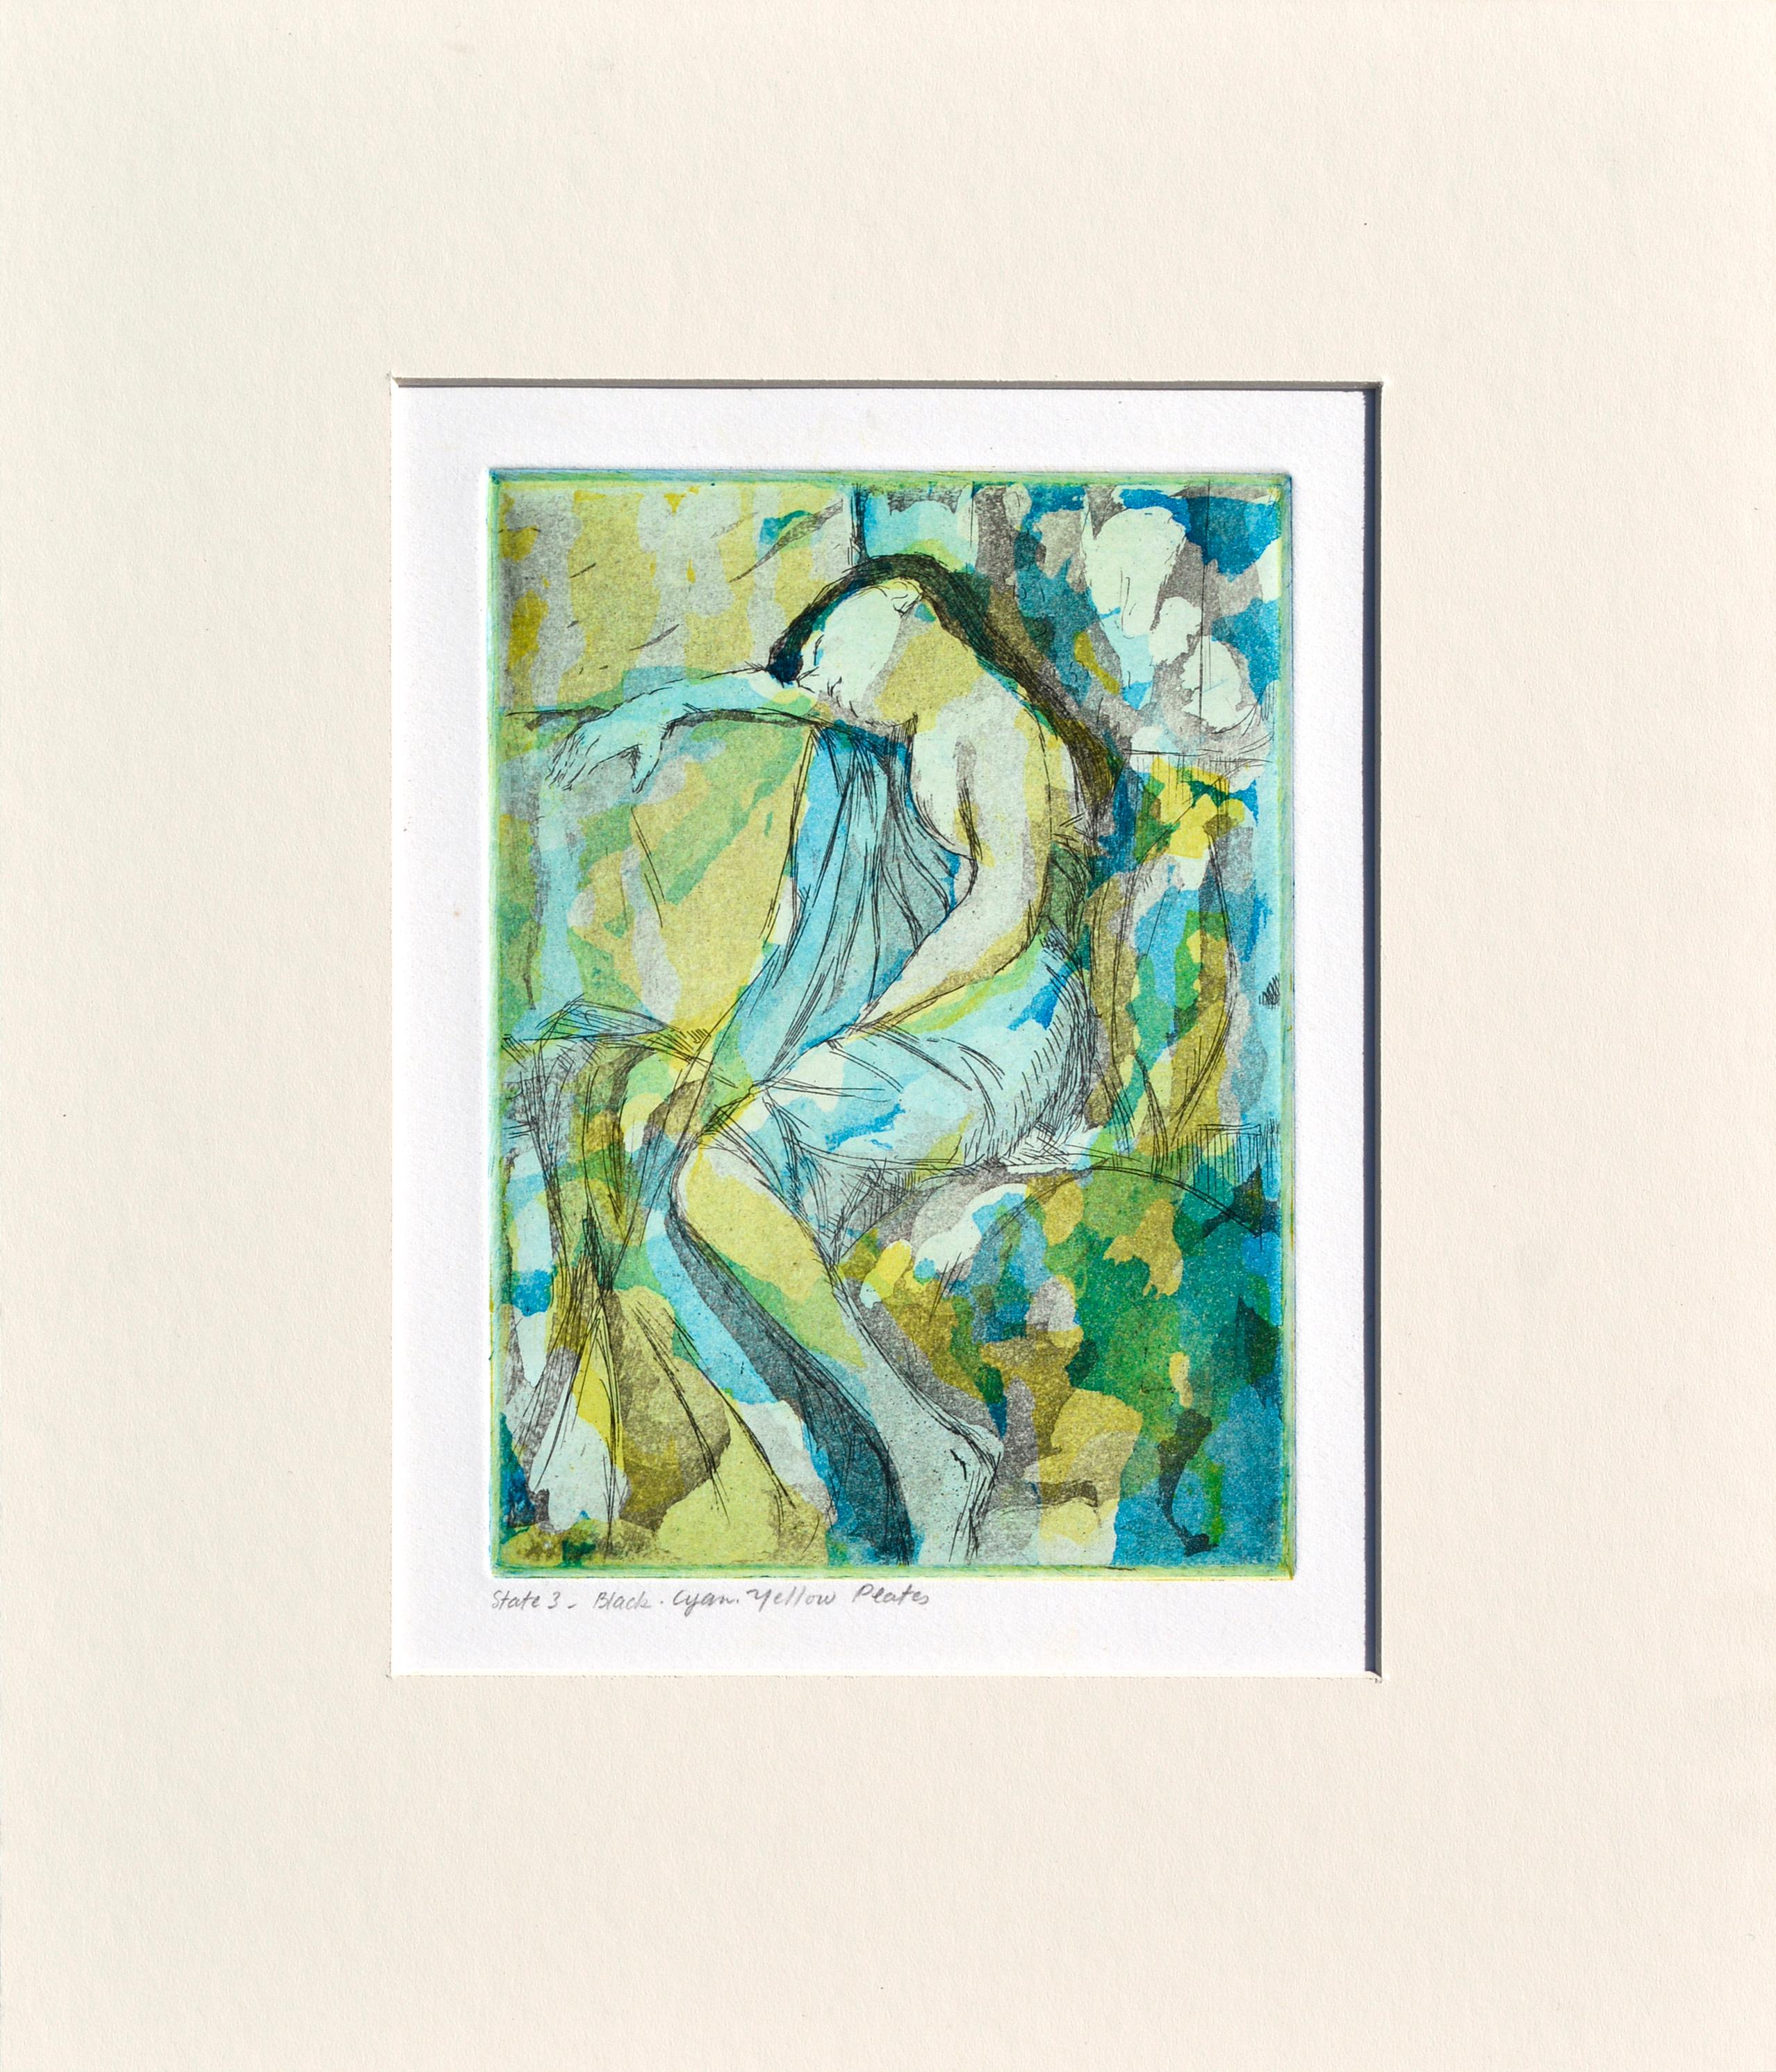 Reclining Woman - Figurative Abstract Series (Set of 4) - Print by Patricia A Pearce